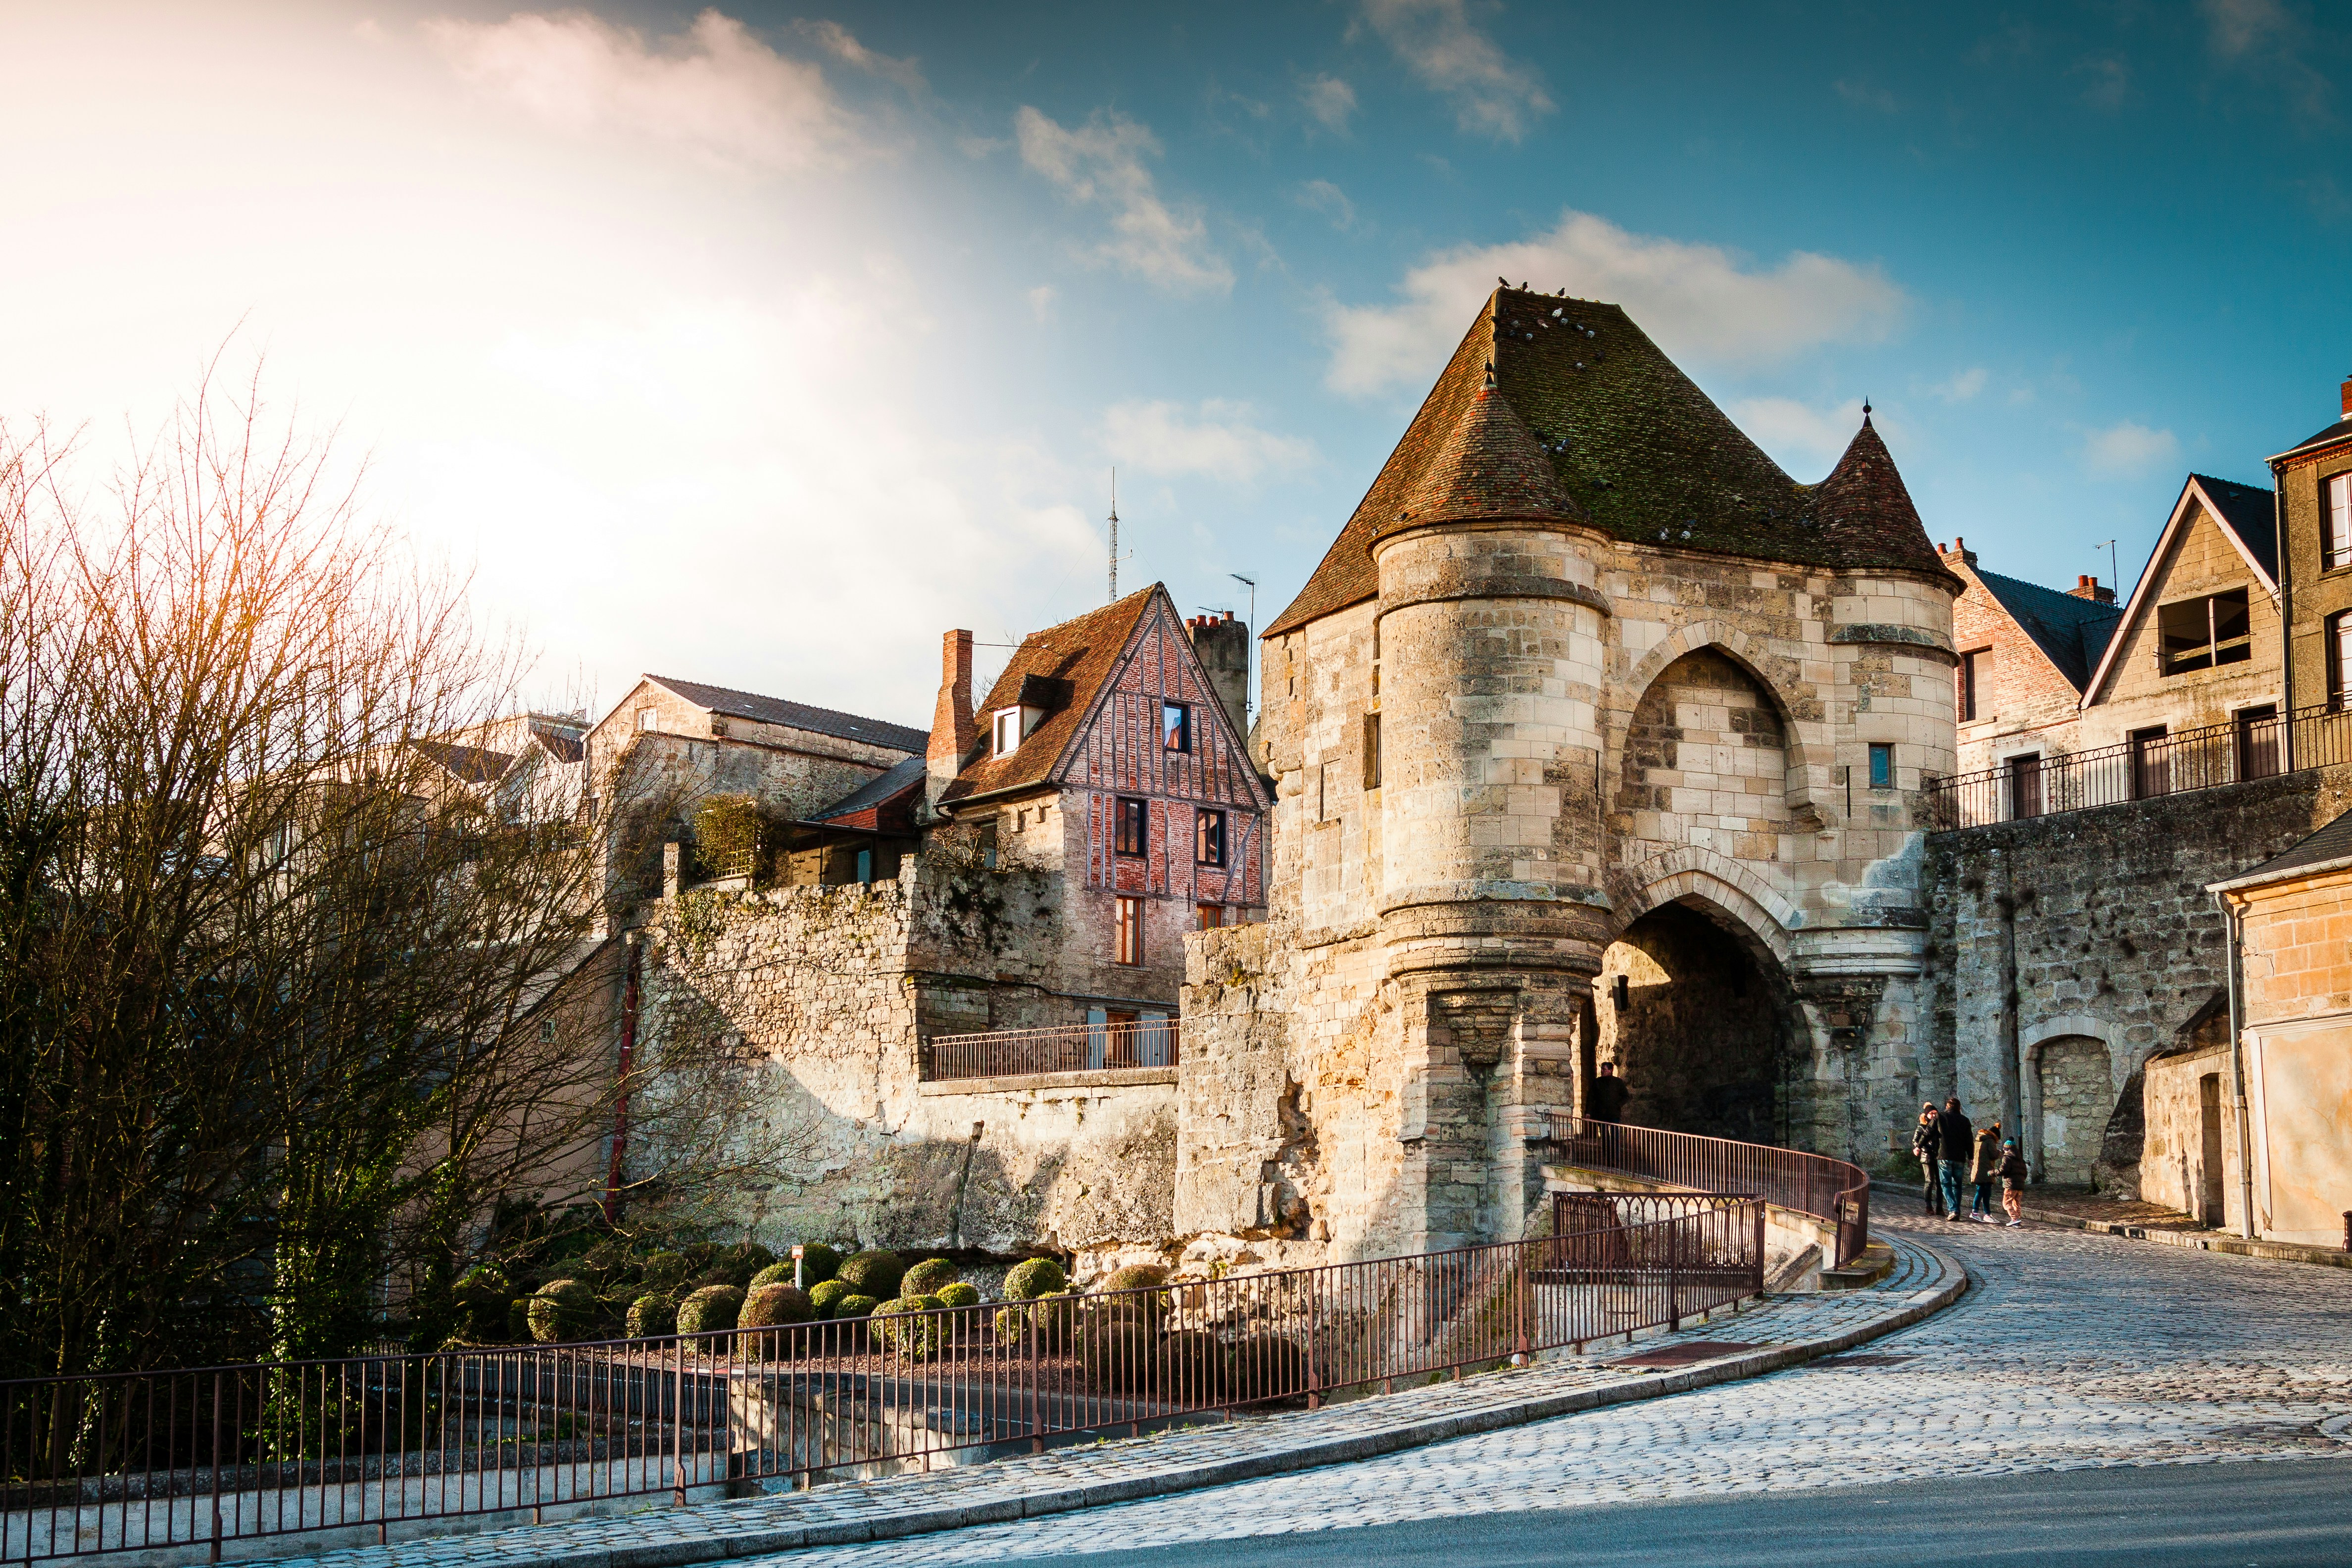 “La Porte d’Ardon”, the Ardon’s gate, or Royal gate in Laon, north of France. Part of the fortification of the old town. The remains of the medieval times gives a real “cachet” to the town.